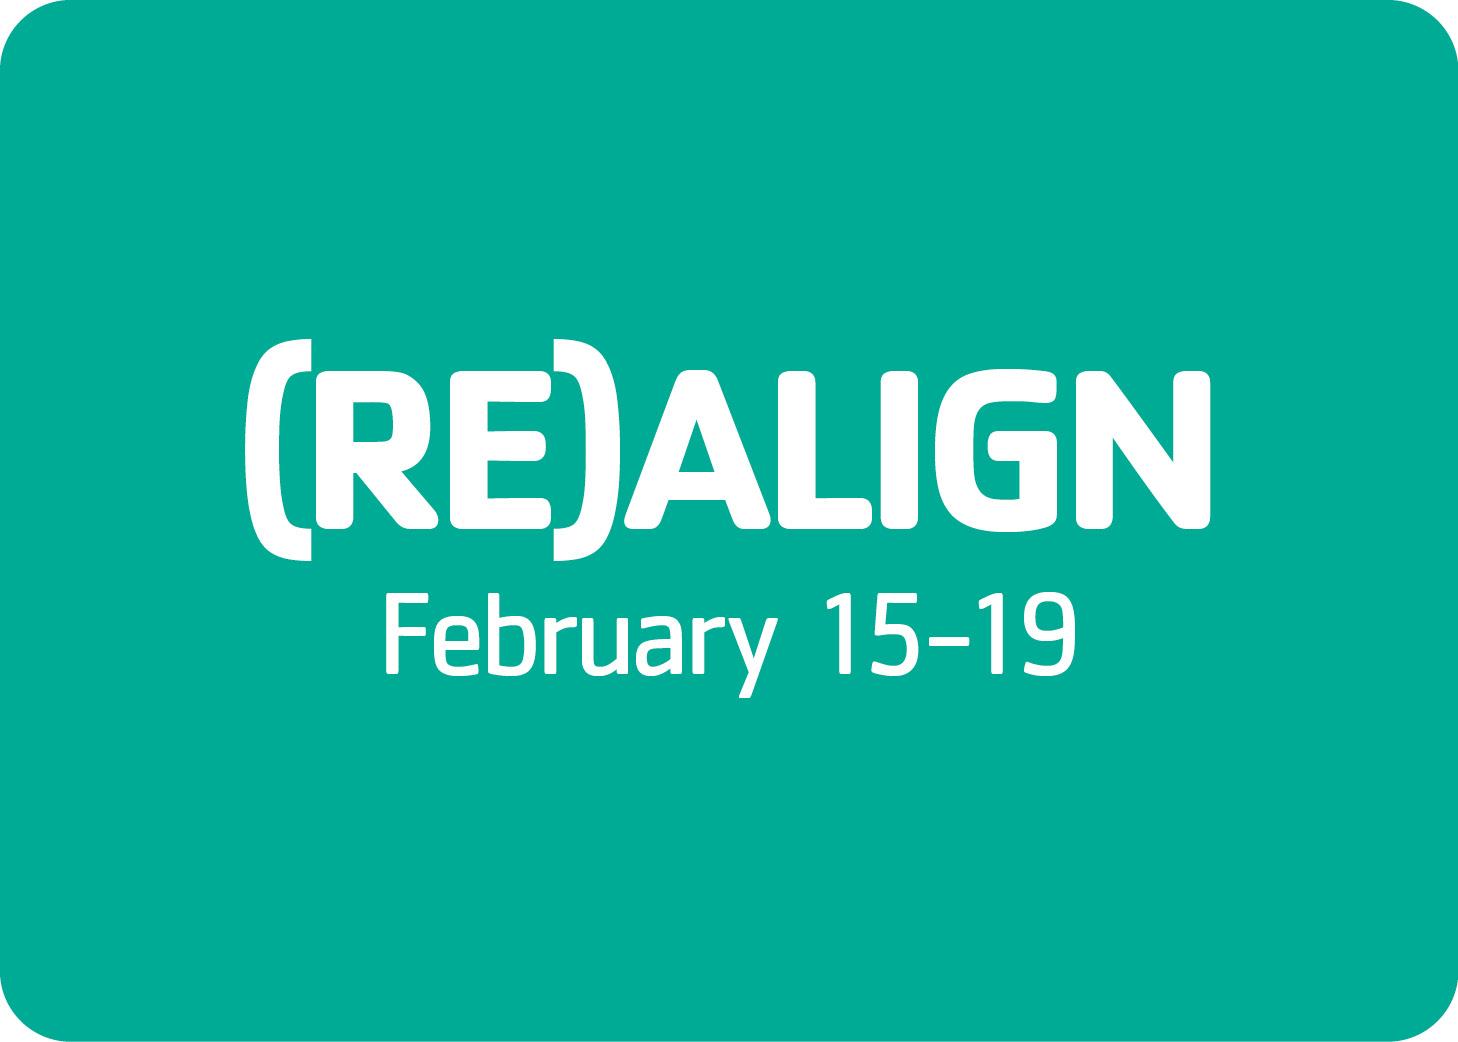 Image of the word realign